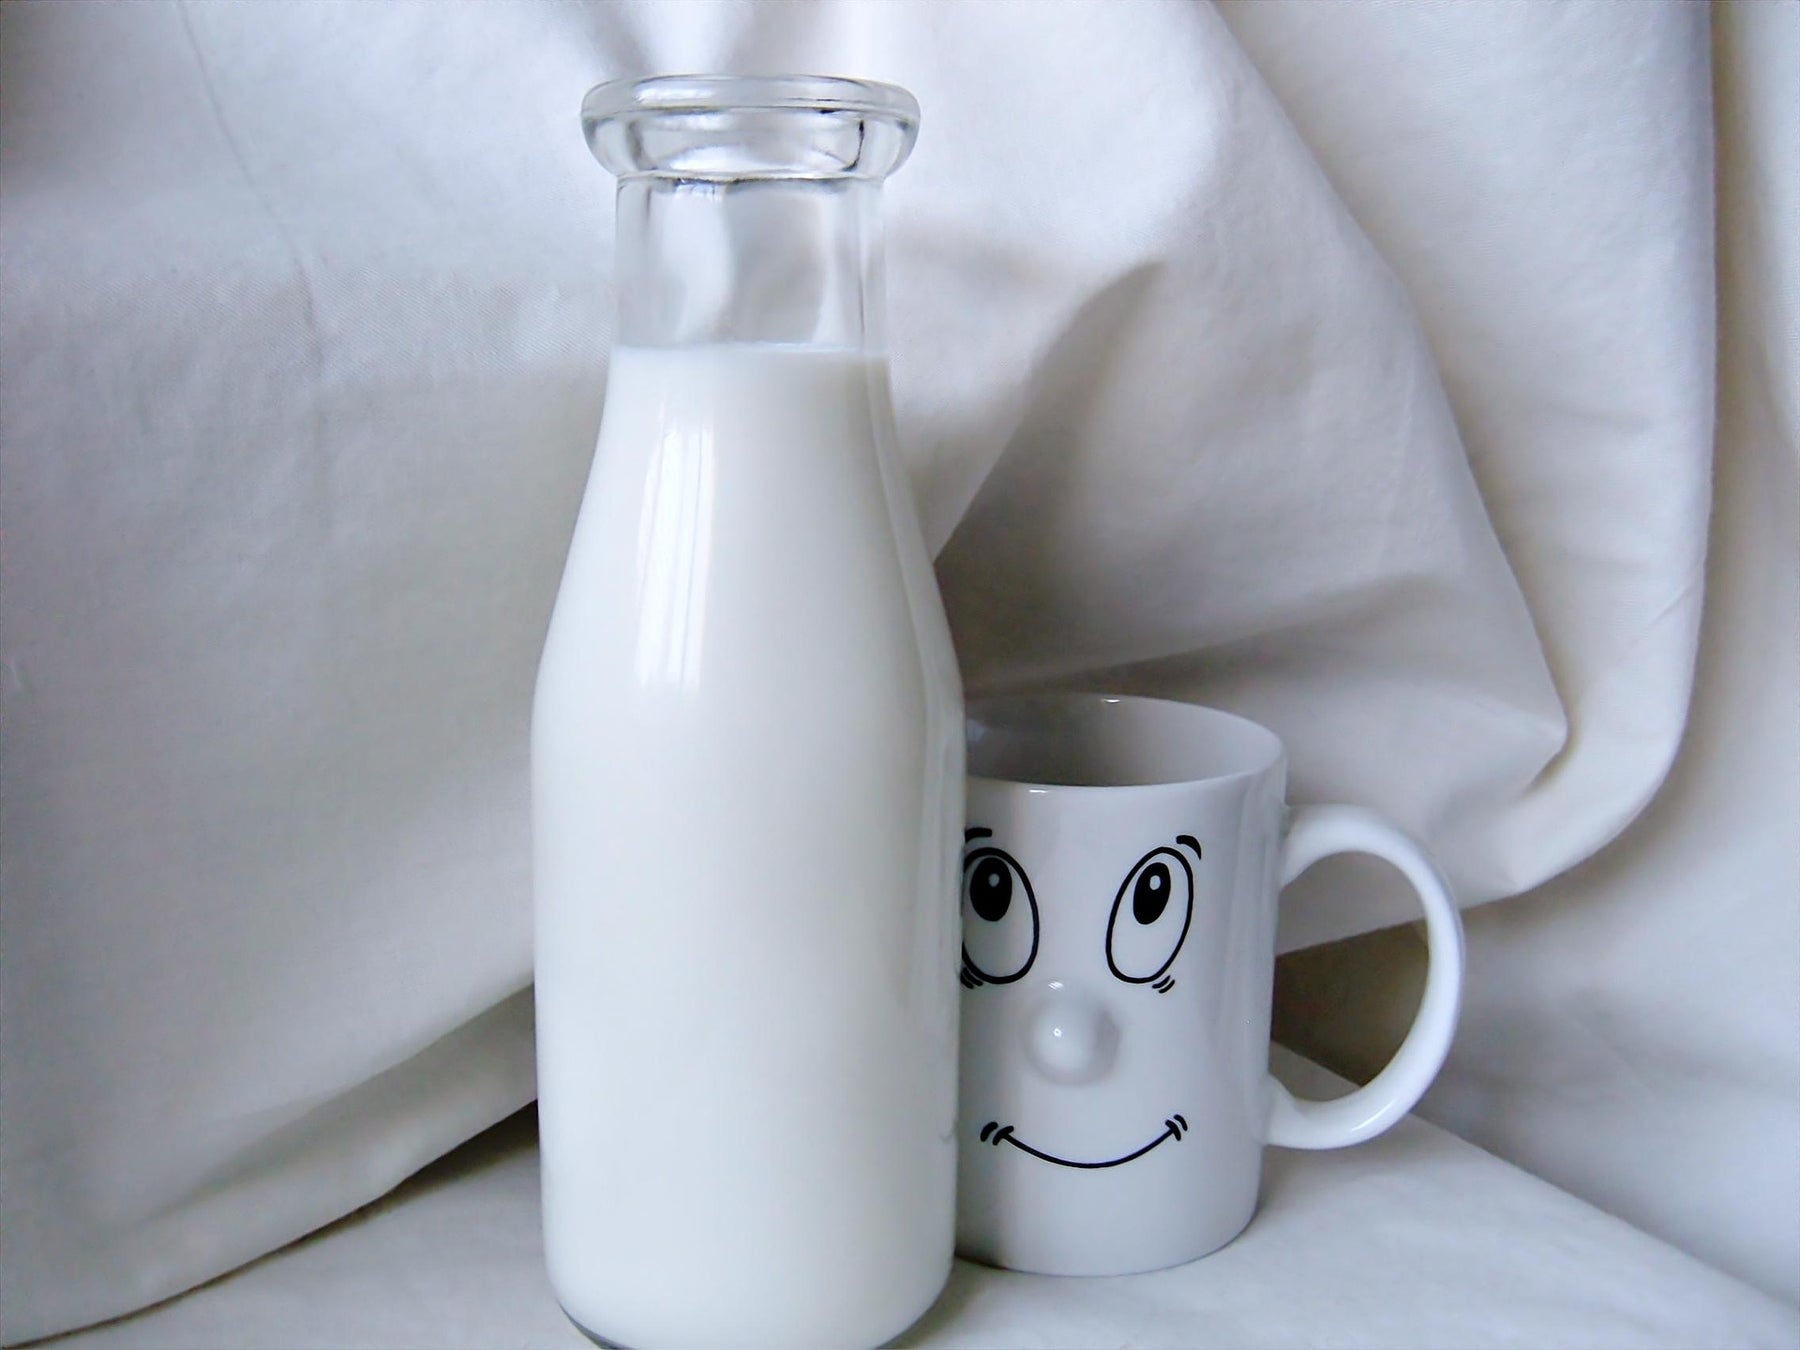 Bottle of milk next to a cup with a face drawn on it